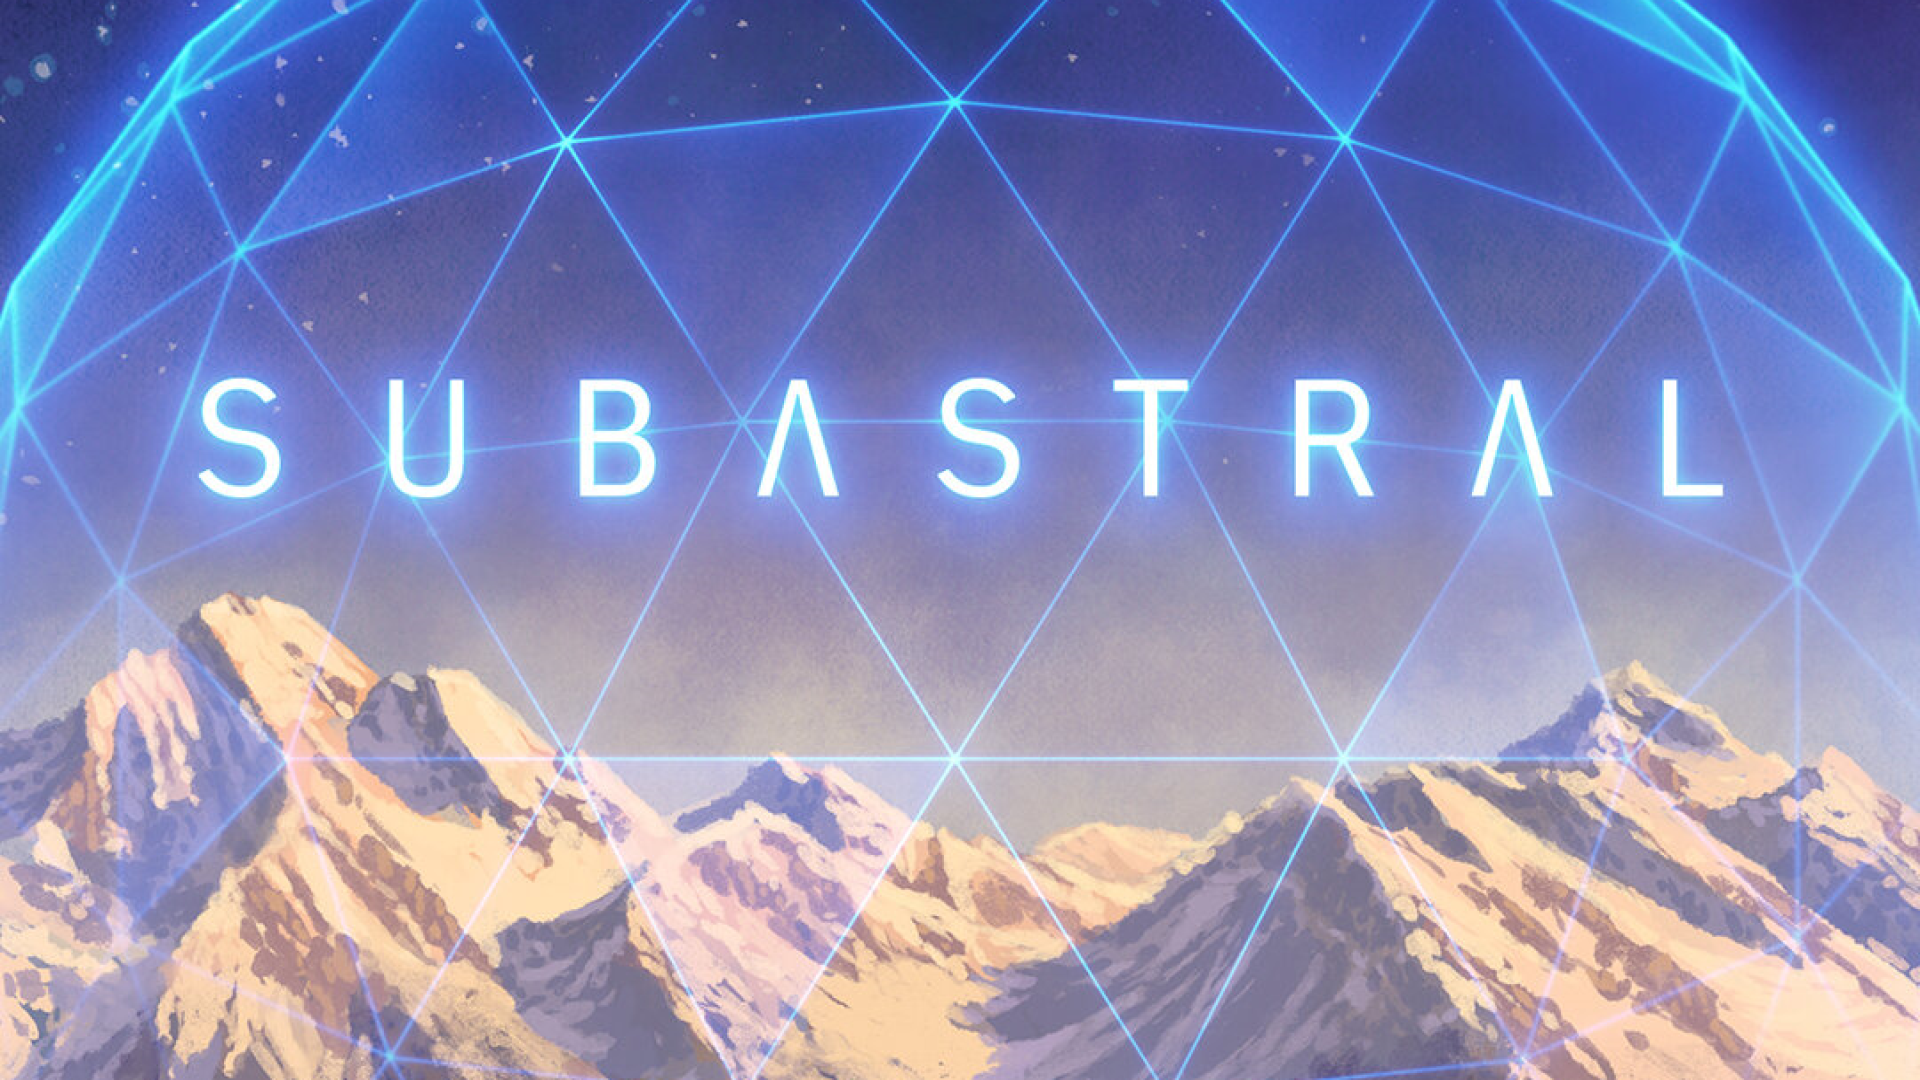 Image for Subastral, a new card game from the designers of Stellar, is landing this summer